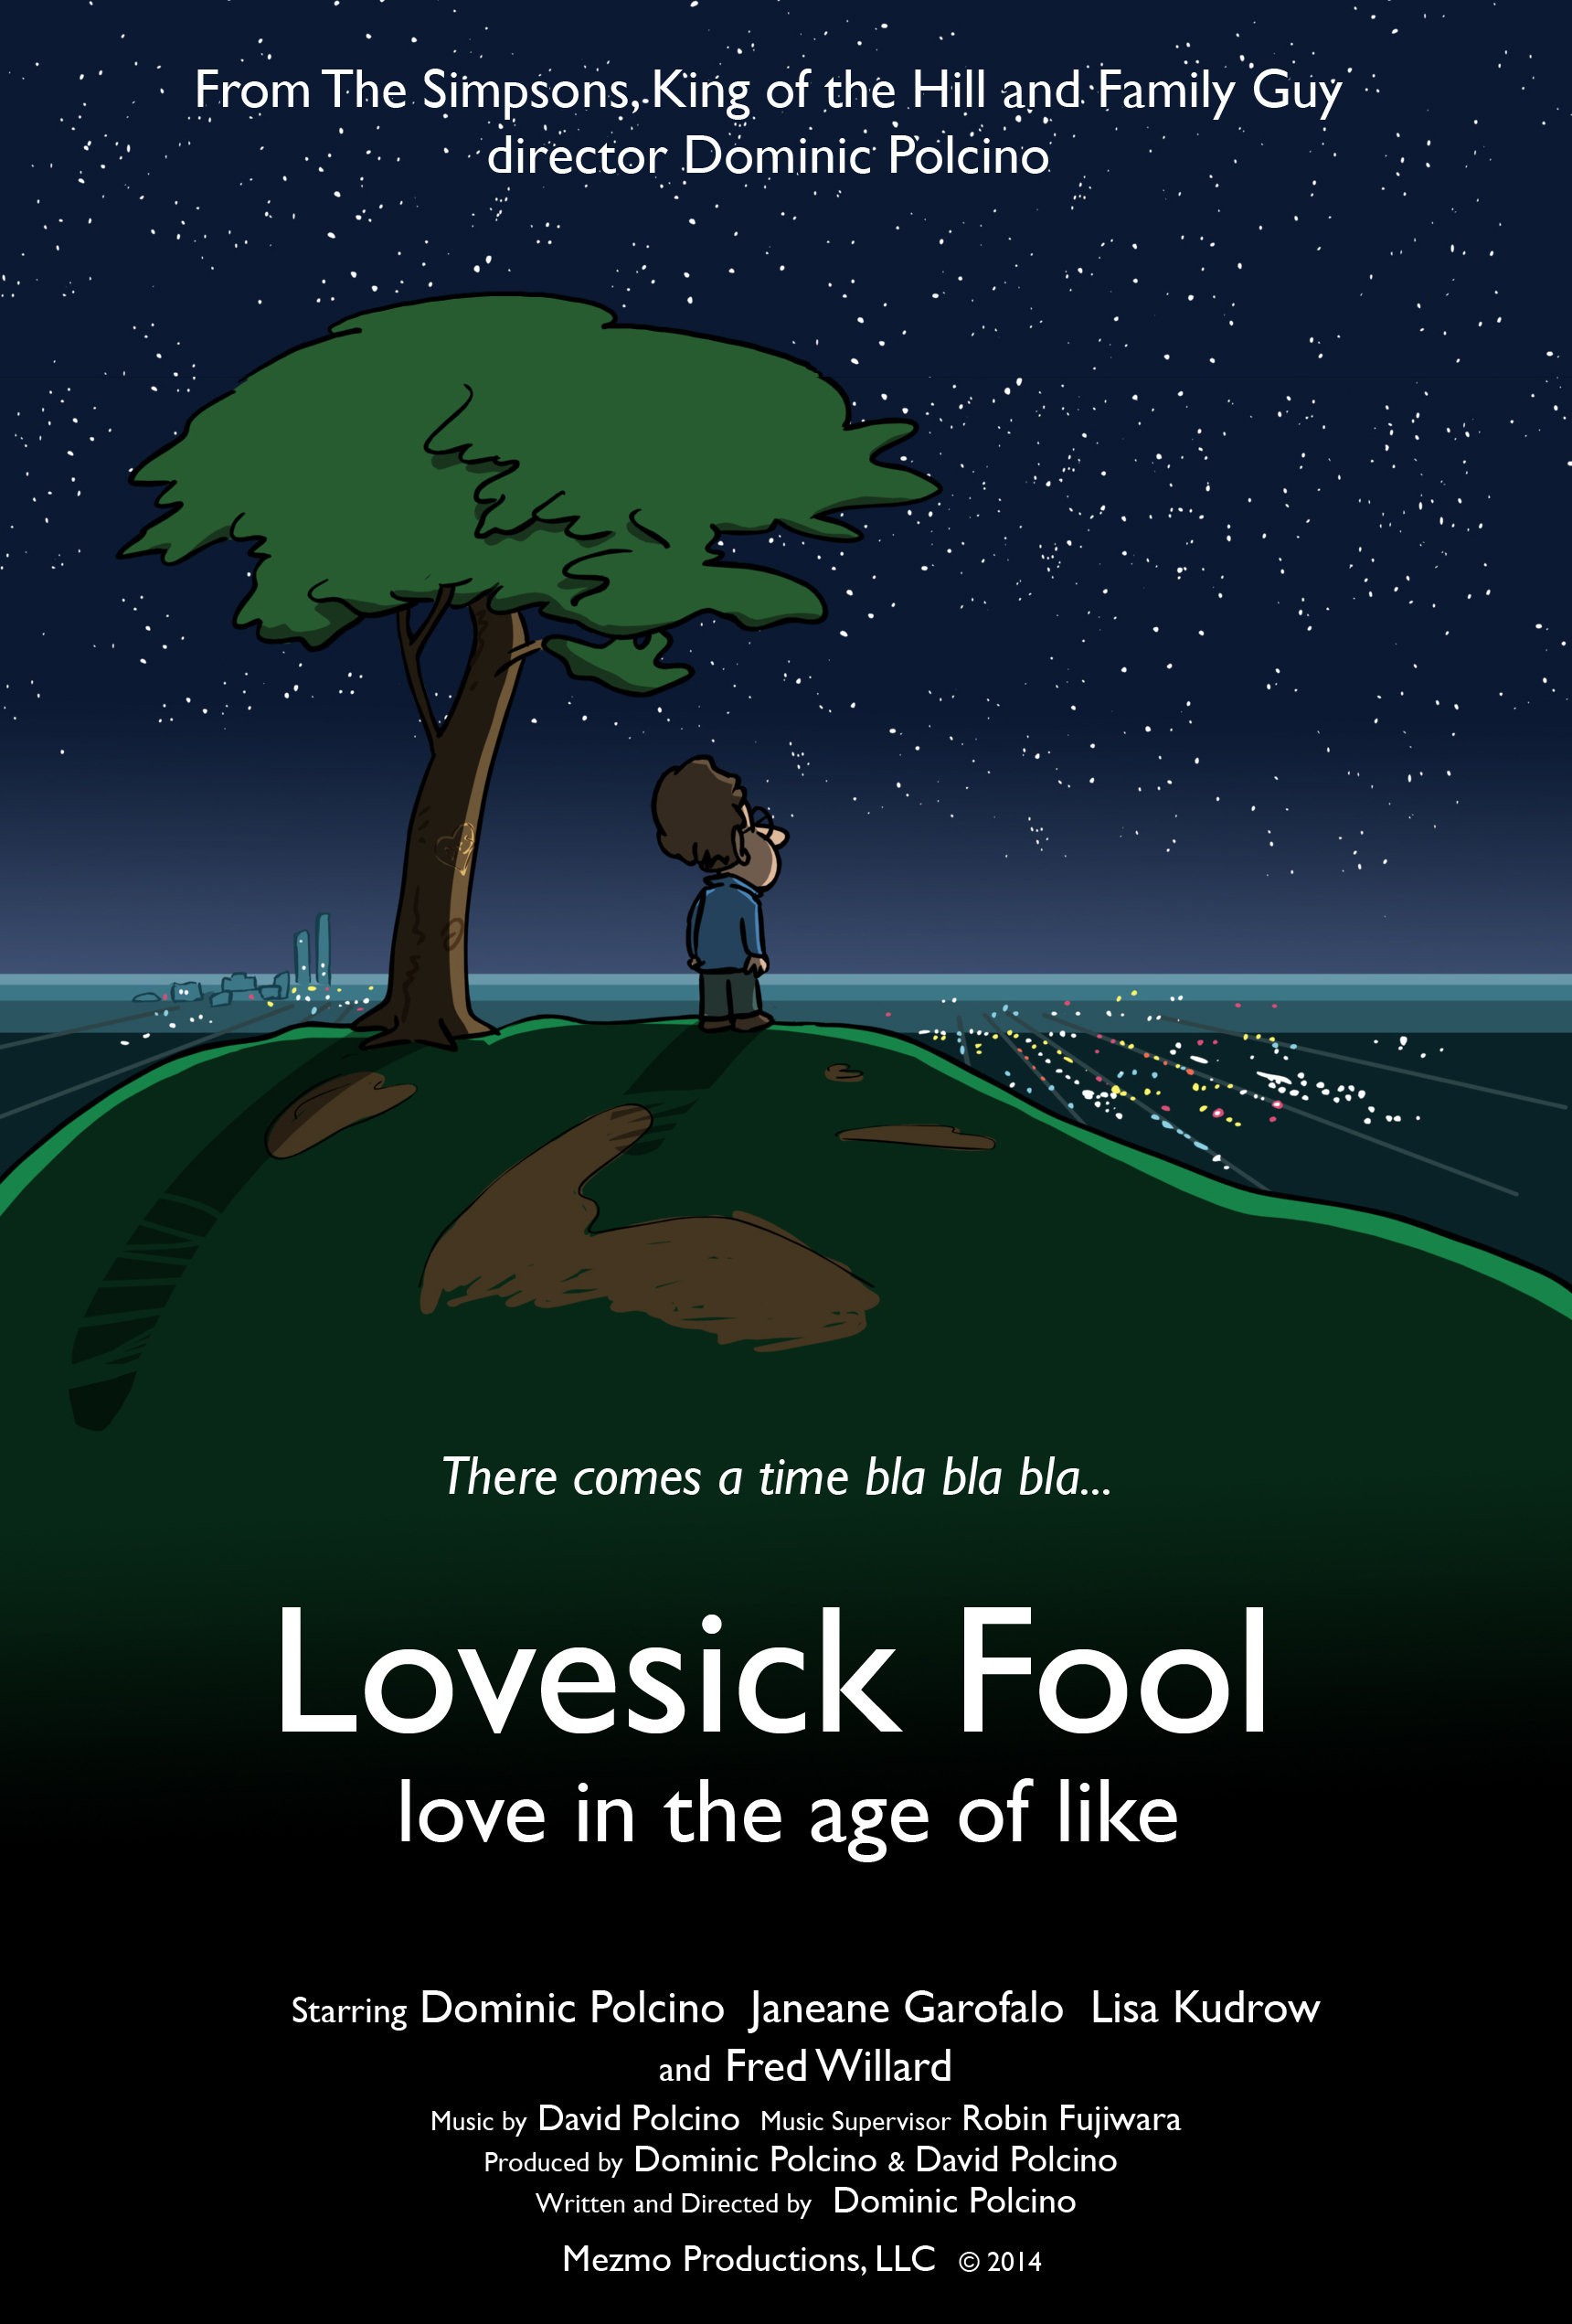 Mega Sized Movie Poster Image for Lovesick Fool - Love in the Age of Like